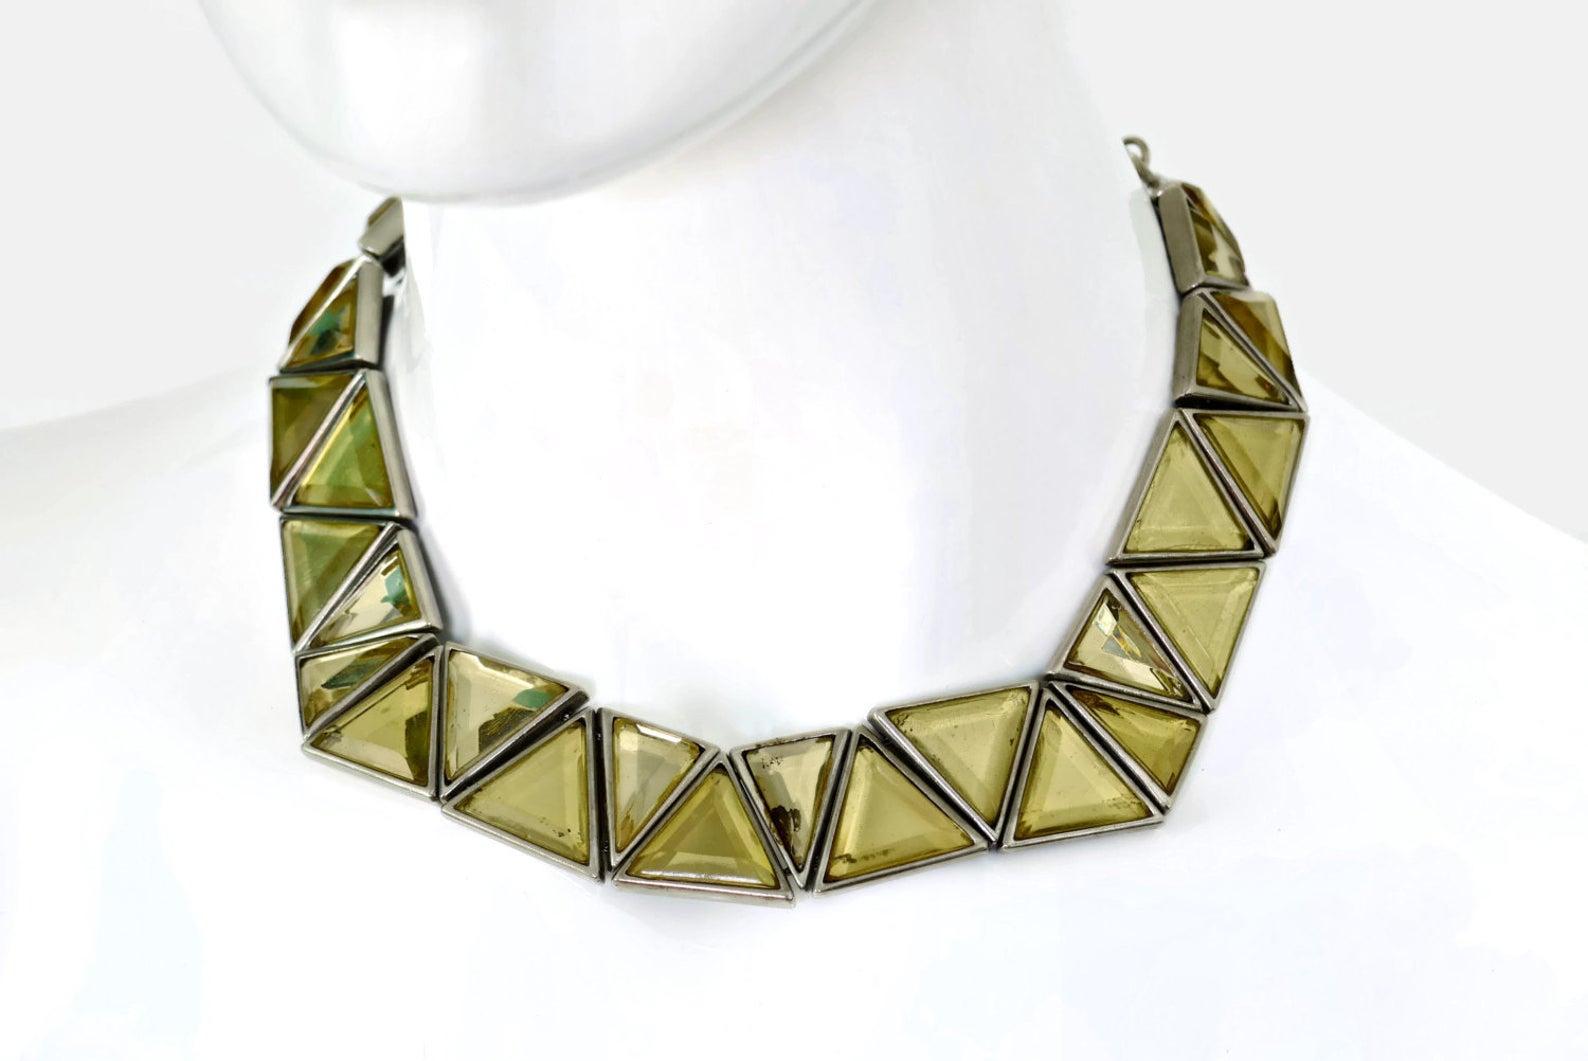 Vintage YVES SAINT LAURENT Resin Geometric Necklace by Robert Goossens

Measurement:
Height: 1 inch

Features:
- 100% Authentic YVES SAINT LAURENT.
- Geometric resin in yellow colour set on silver tone hardware.
- Adjustable spring lobster closure